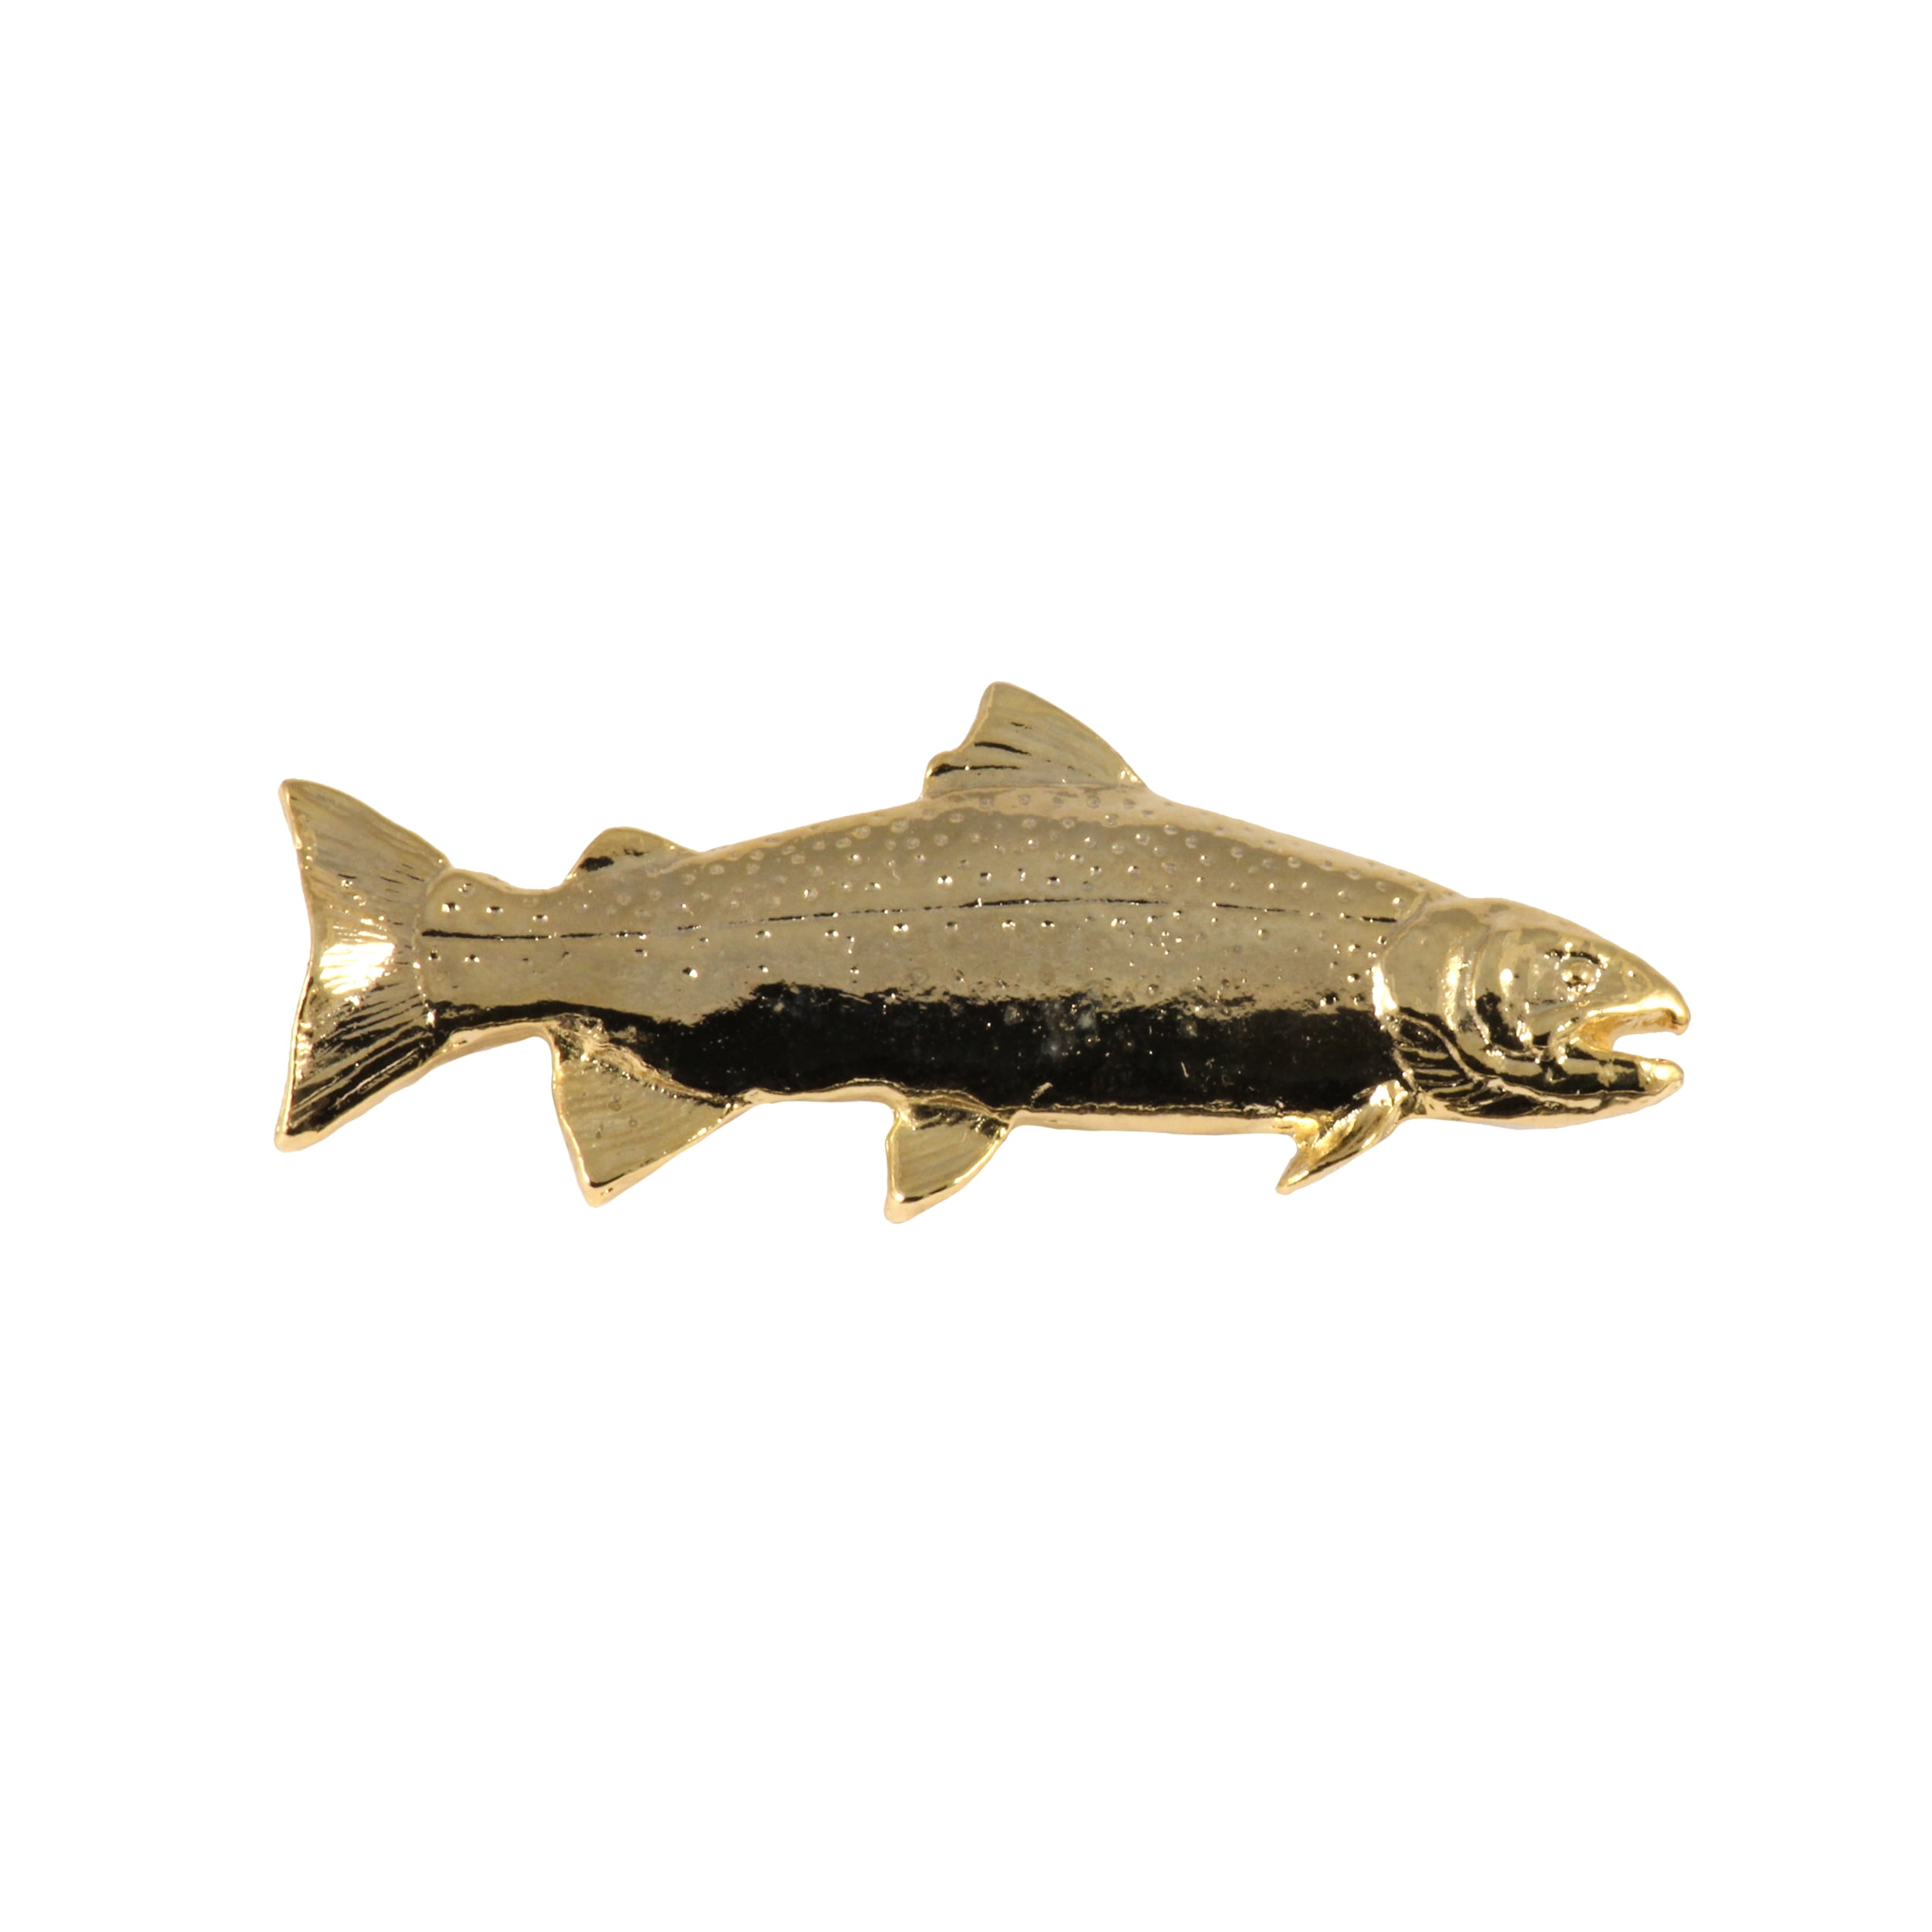 Rainbow Trout Pin, F002, 1 1/2 Lapel Pin, Hat, Pins, Brooch, Brooches,  Jewelry, Gift, Fishing, Salmonoids, 100% Handmade in the USA, 200 Fish  Designs